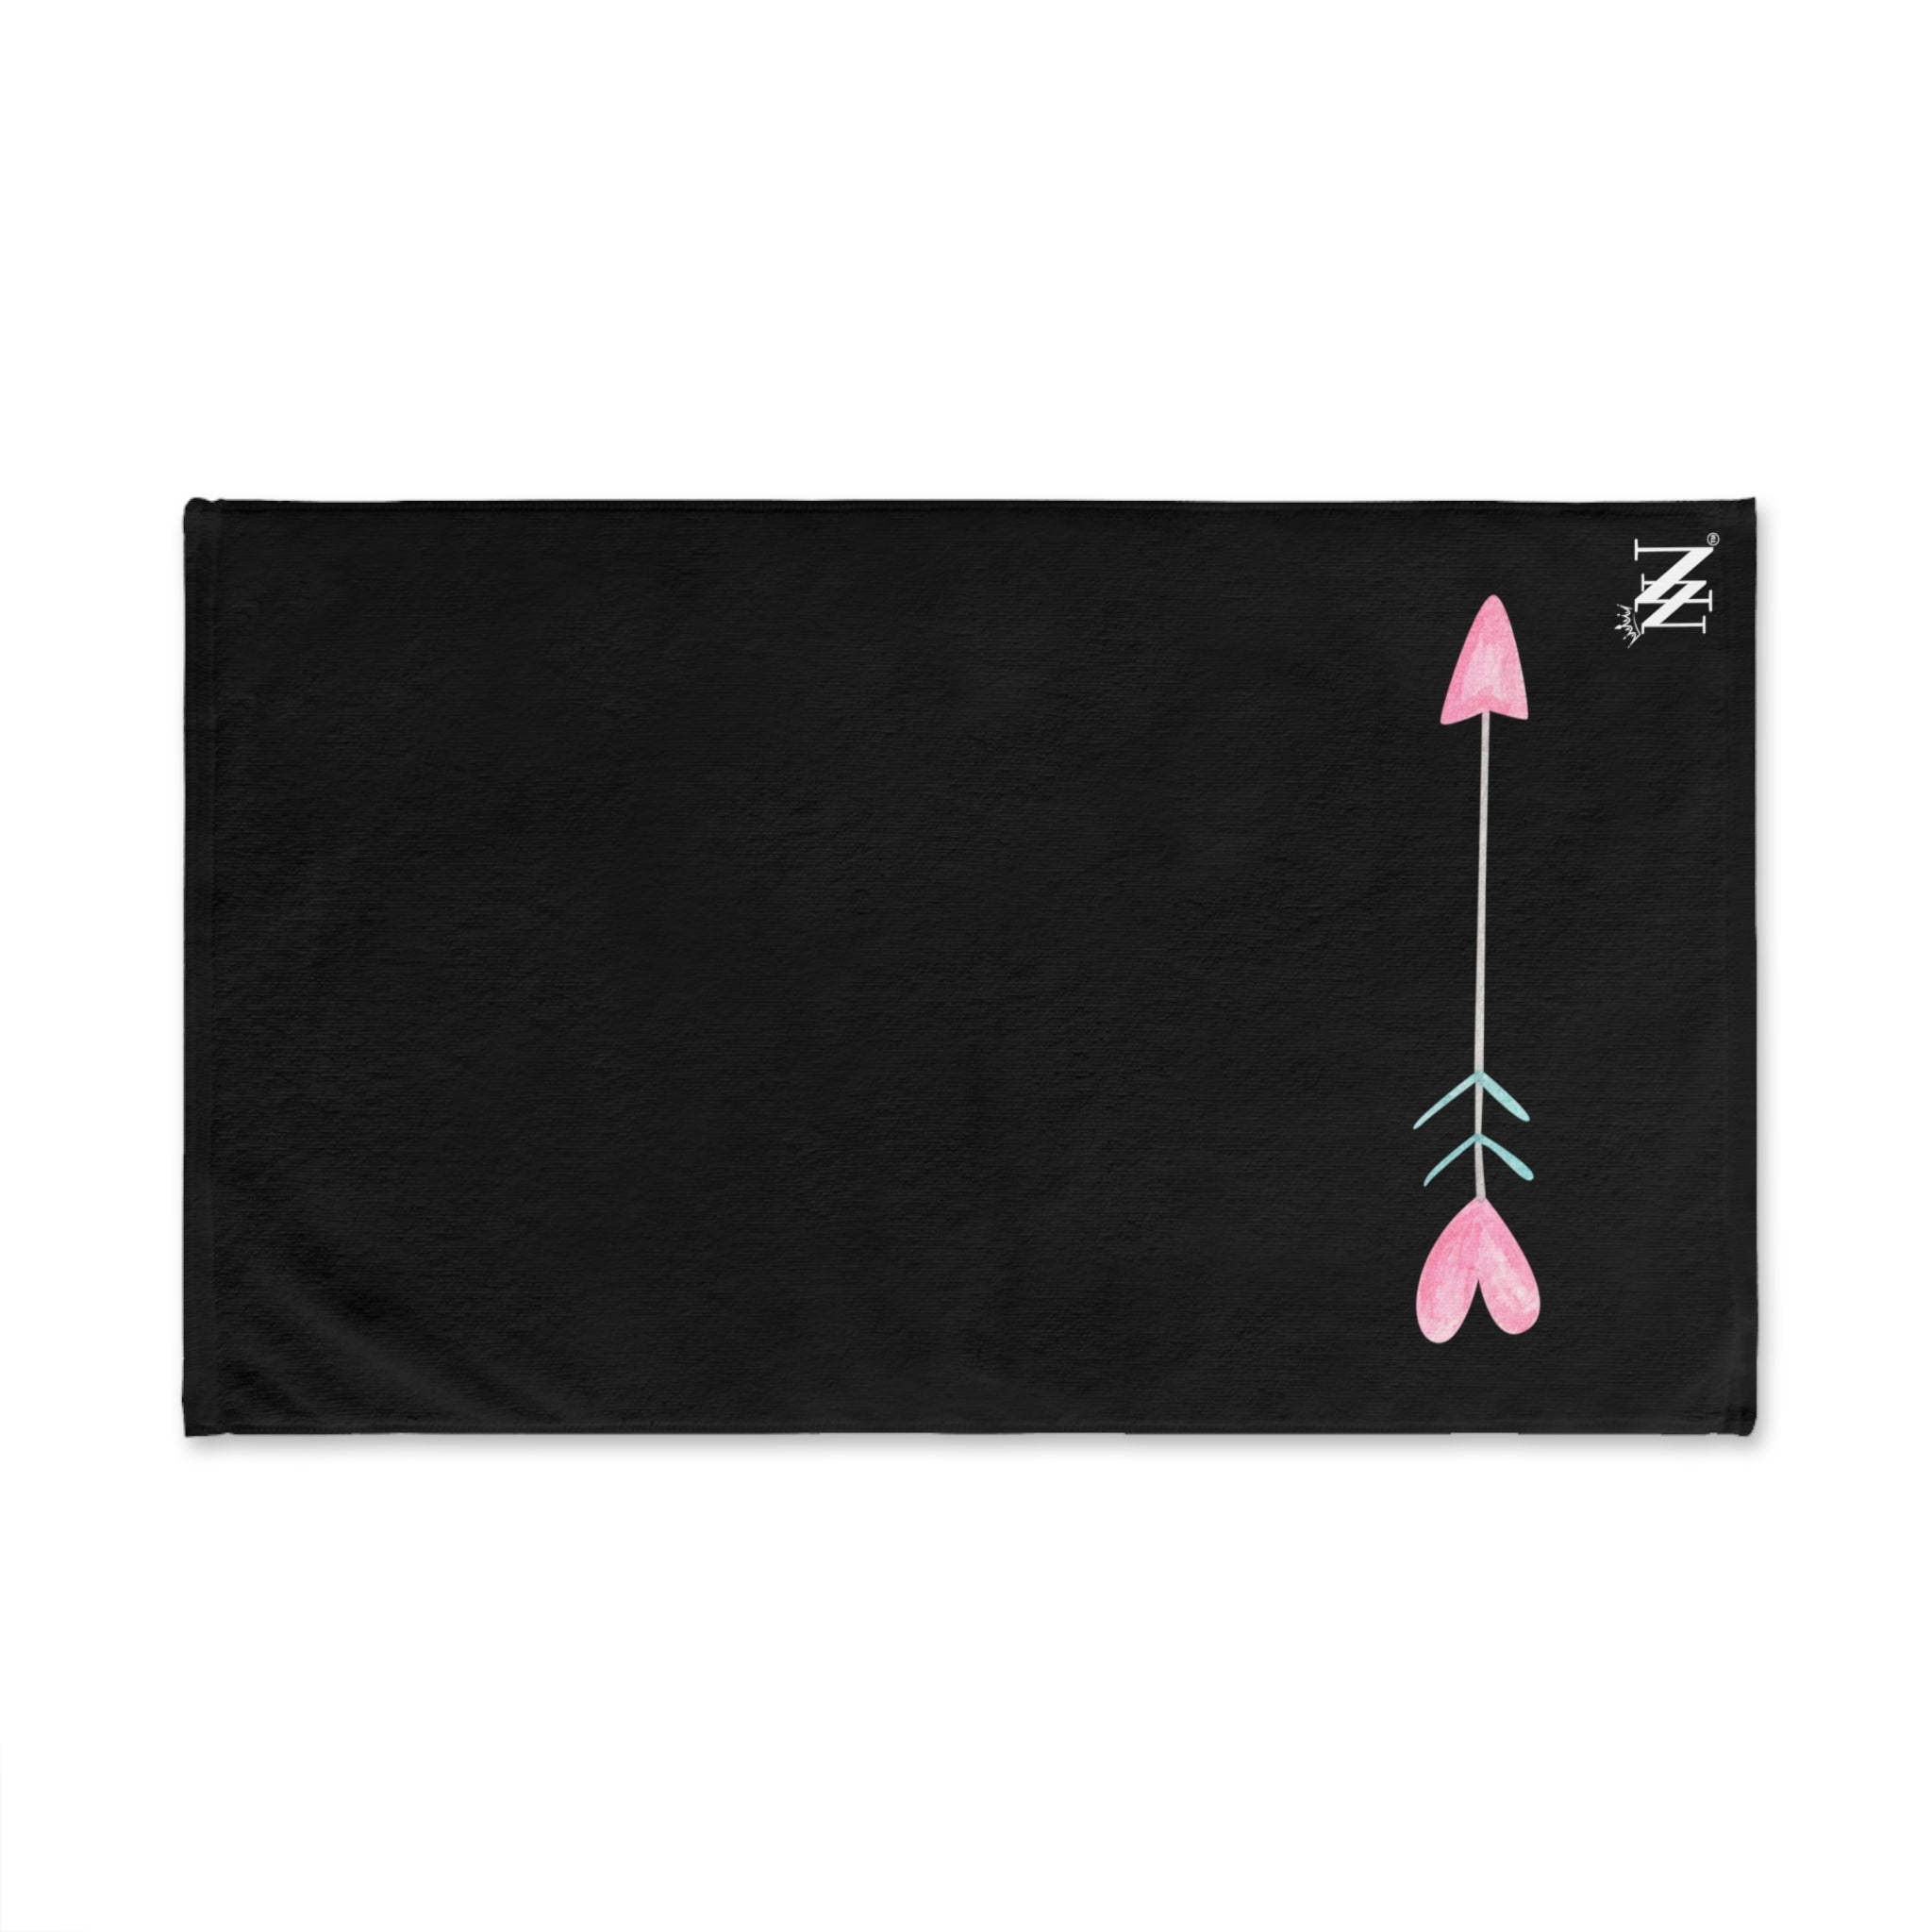 Simple Heart Arrow Black | Sexy Gifts for Boyfriend, Funny Towel Romantic Gift for Wedding Couple Fiance First Year 2nd Anniversary Valentines, Party Gag Gifts, Joke Humor Cloth for Husband Men BF NECTAR NAPKINS